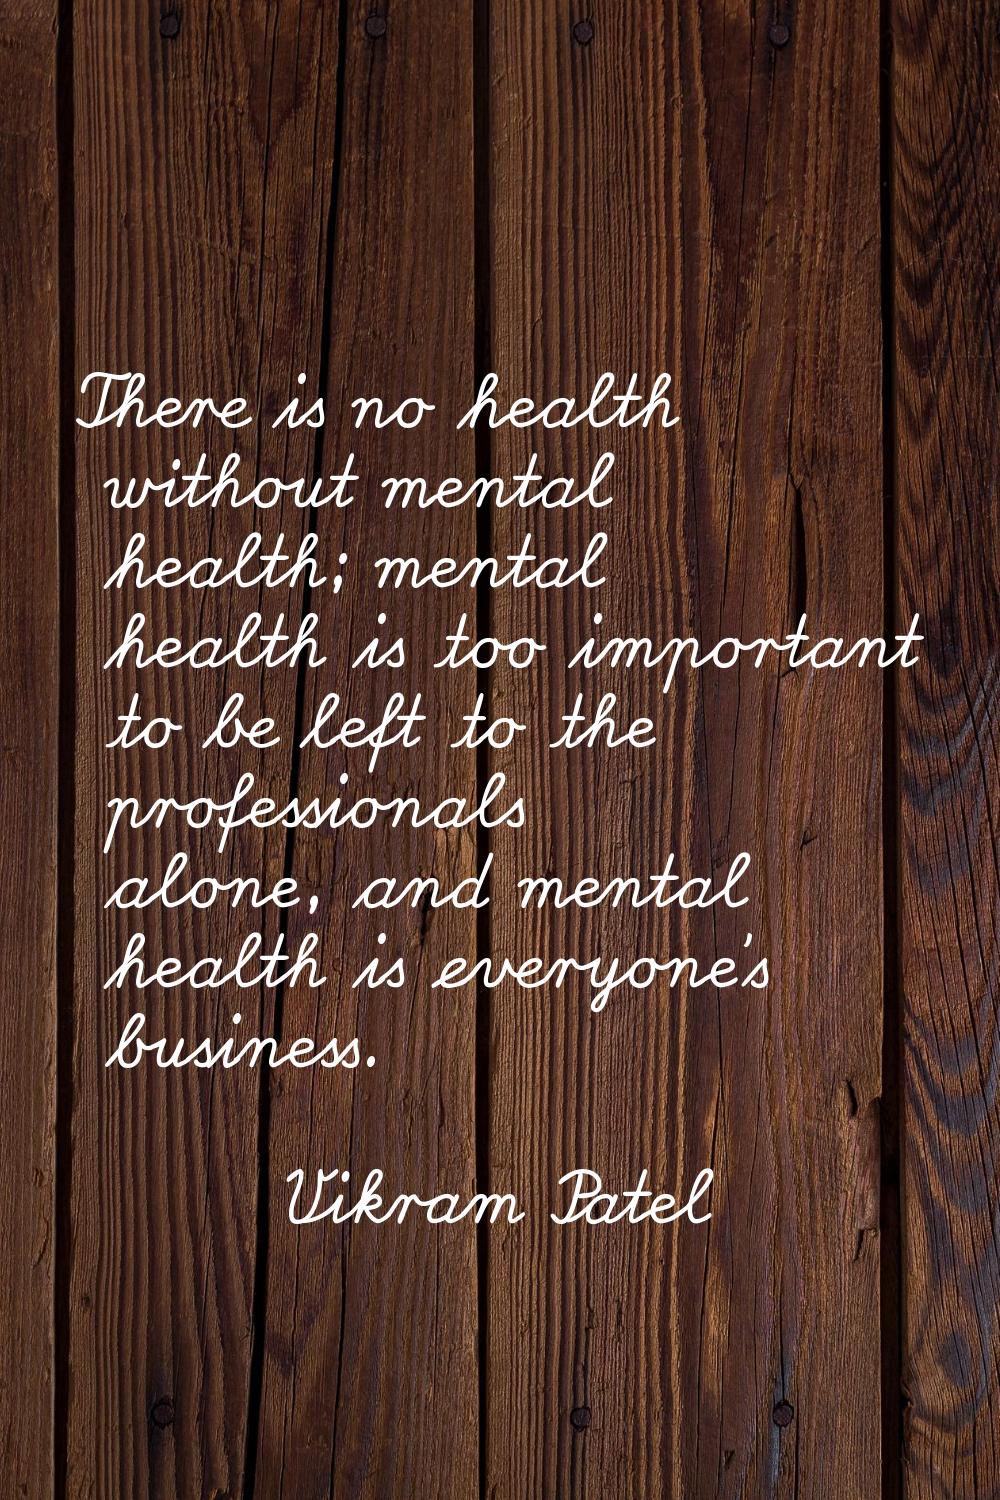 There is no health without mental health; mental health is too important to be left to the professi